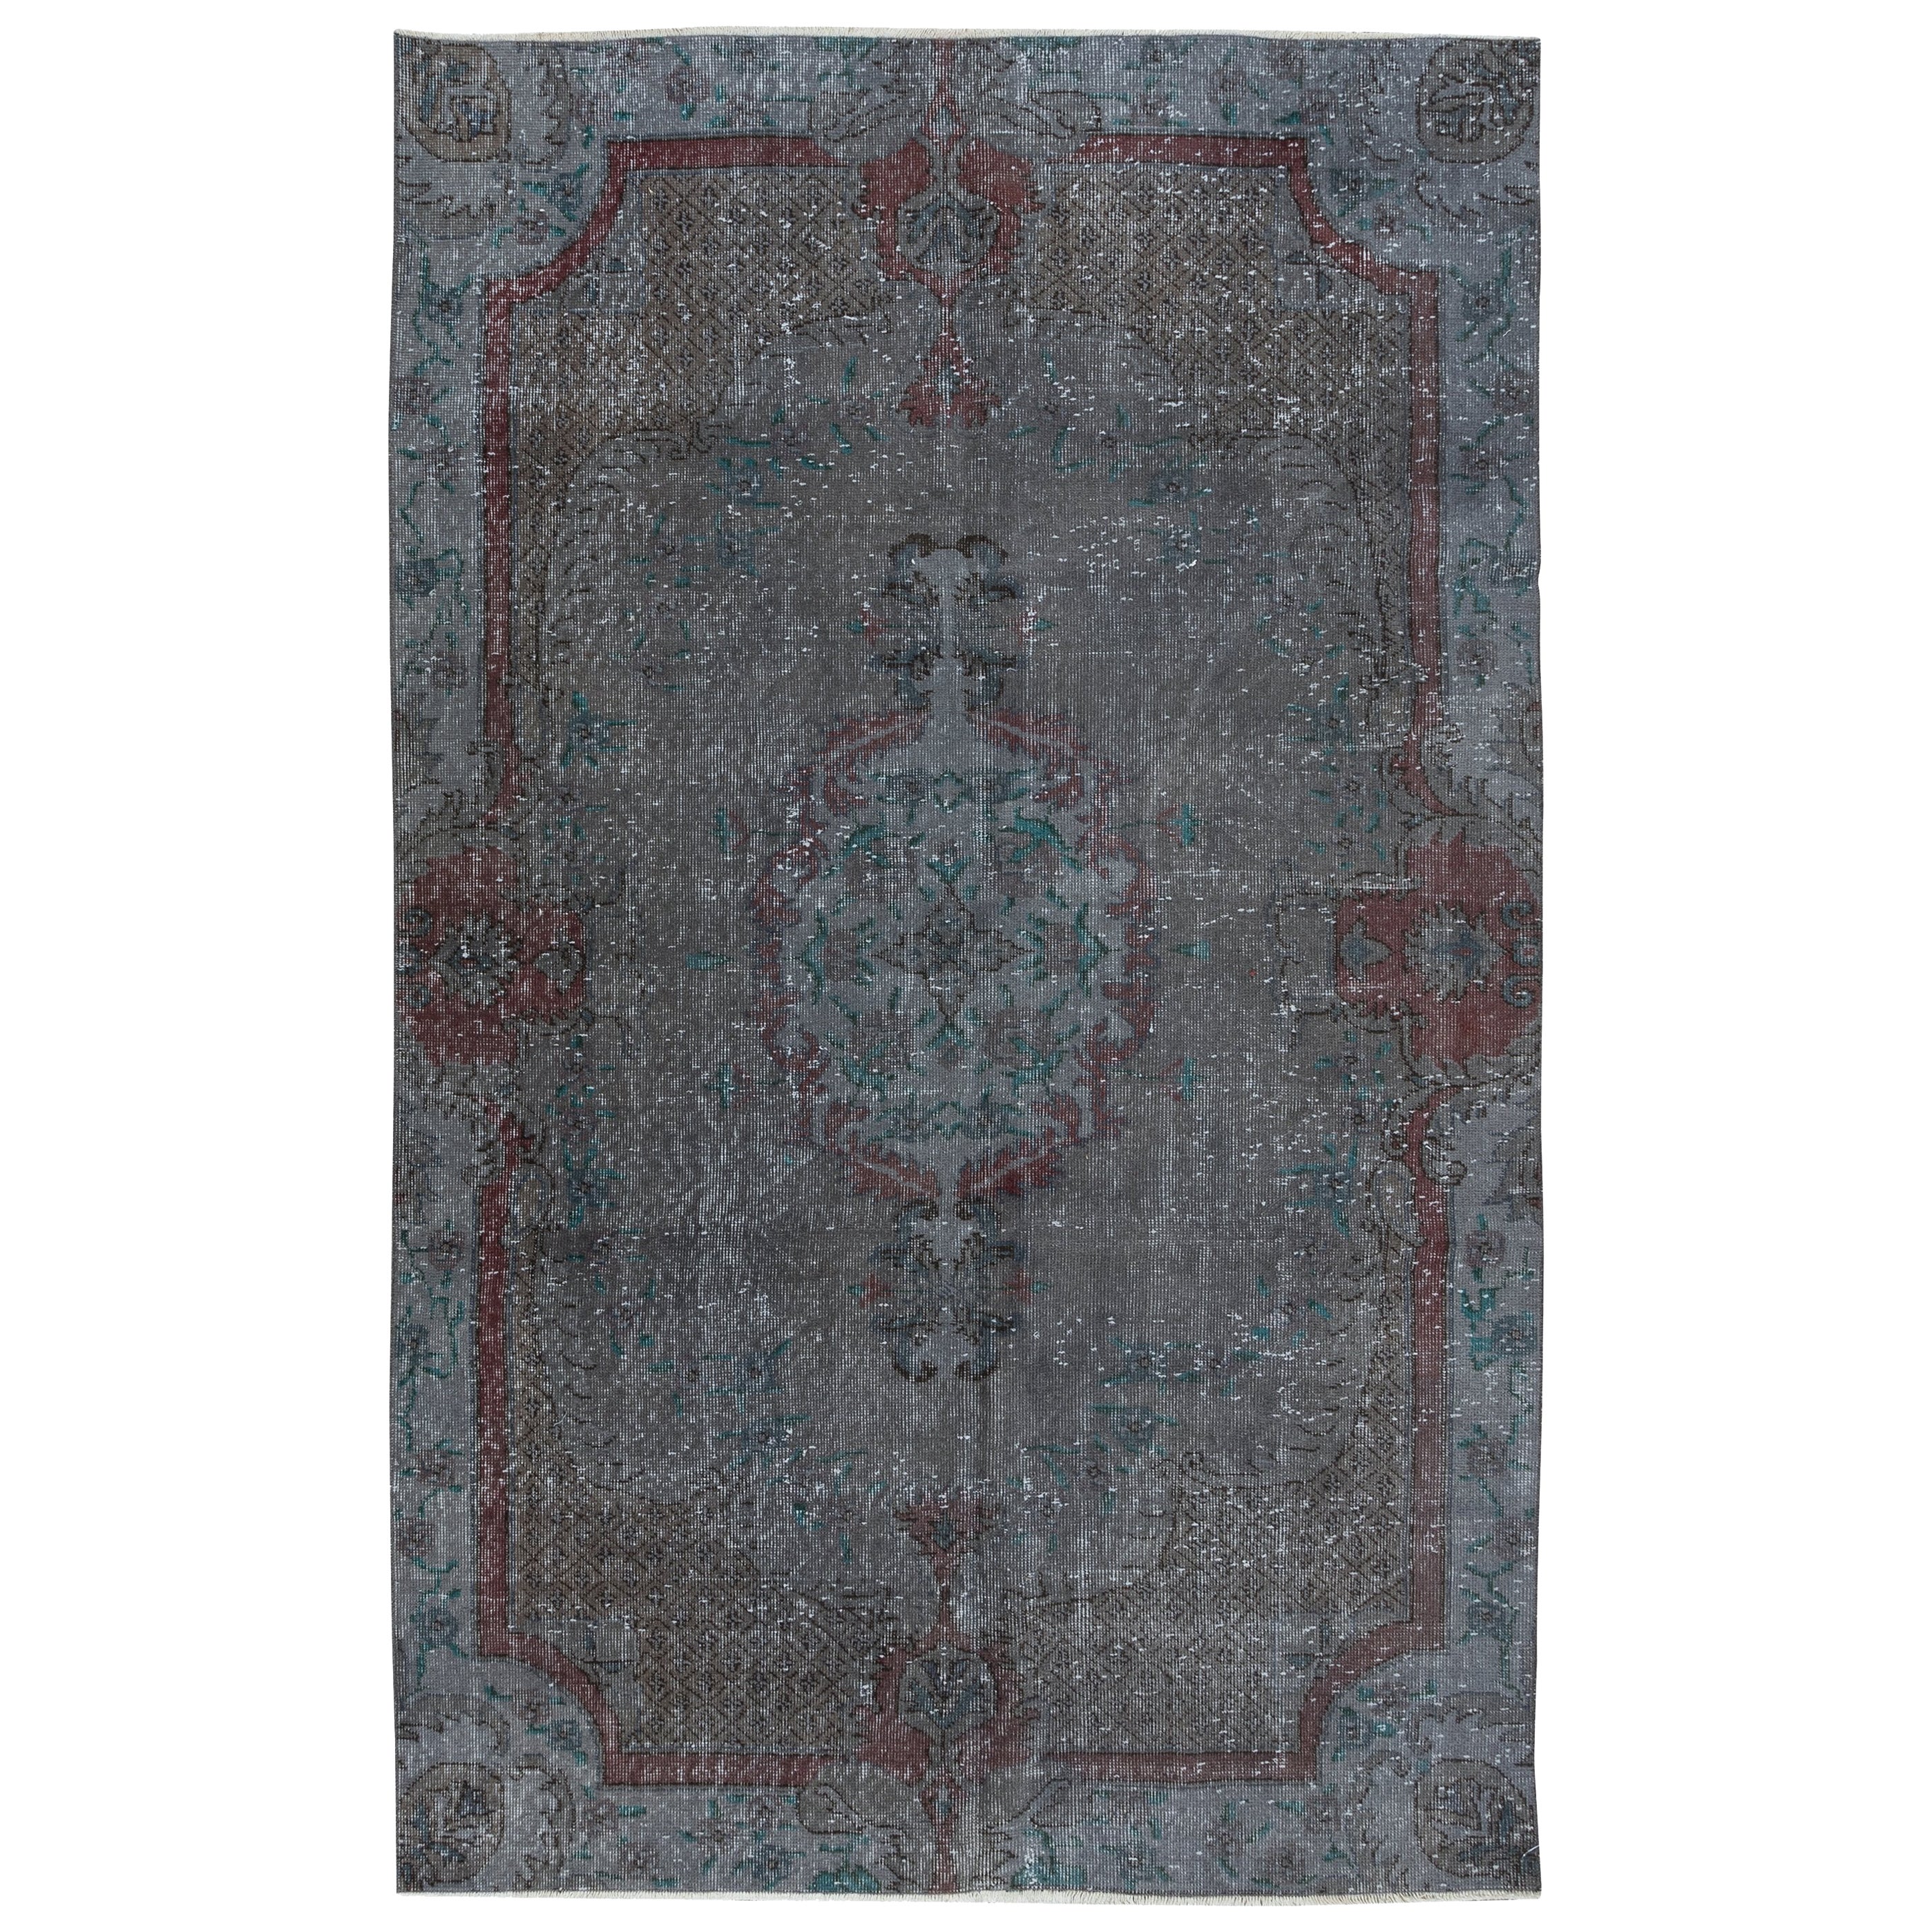 5.3x8.3 Ft Modern Handmade Turkish Low Pile Area Rug in Gray, Maroon Red & Green For Sale